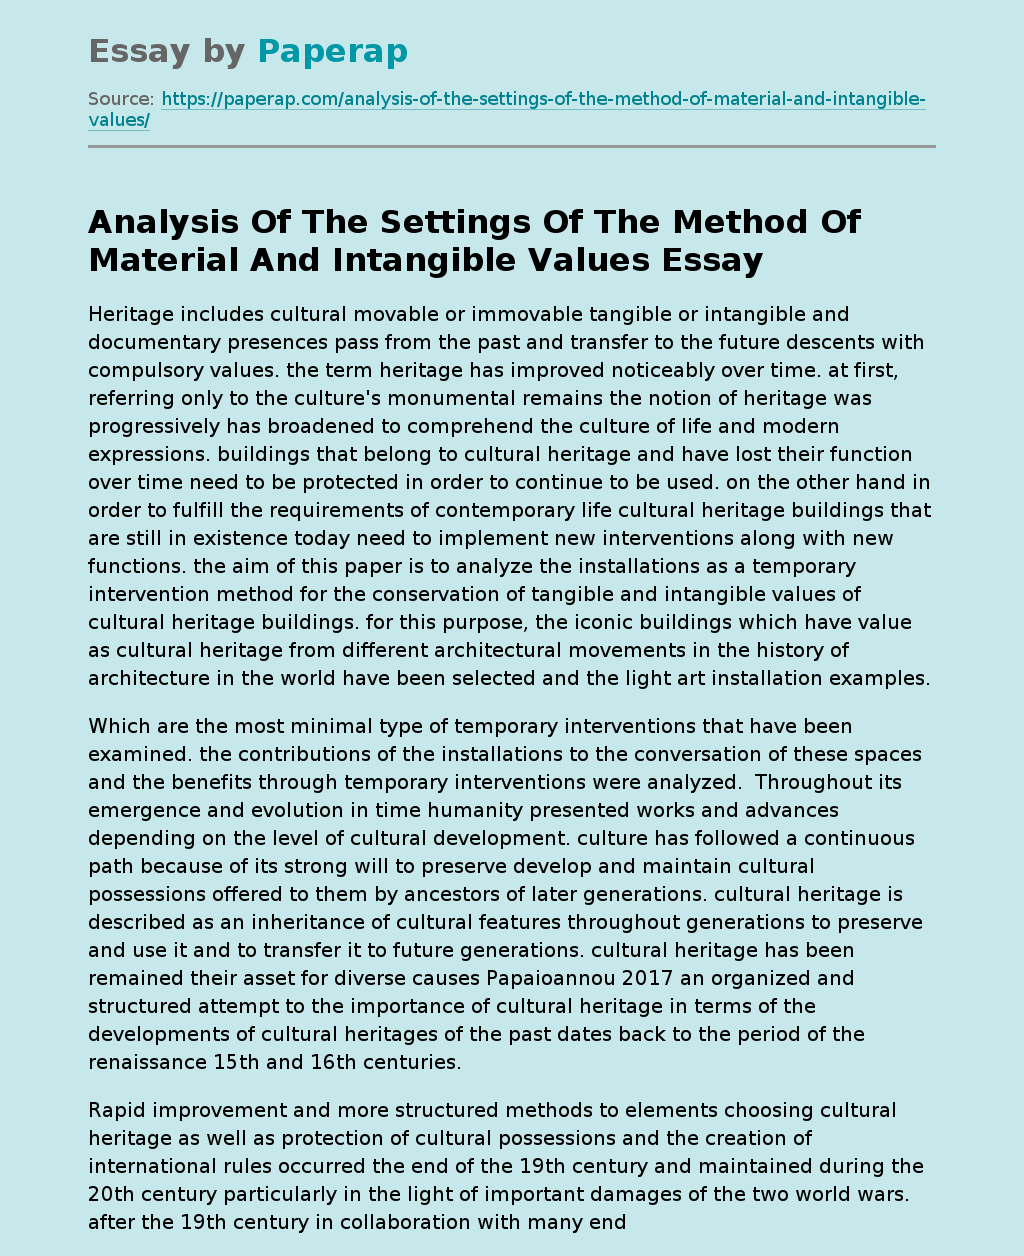 Analysis Of The Settings Of The Method Of Material And Intangible Values